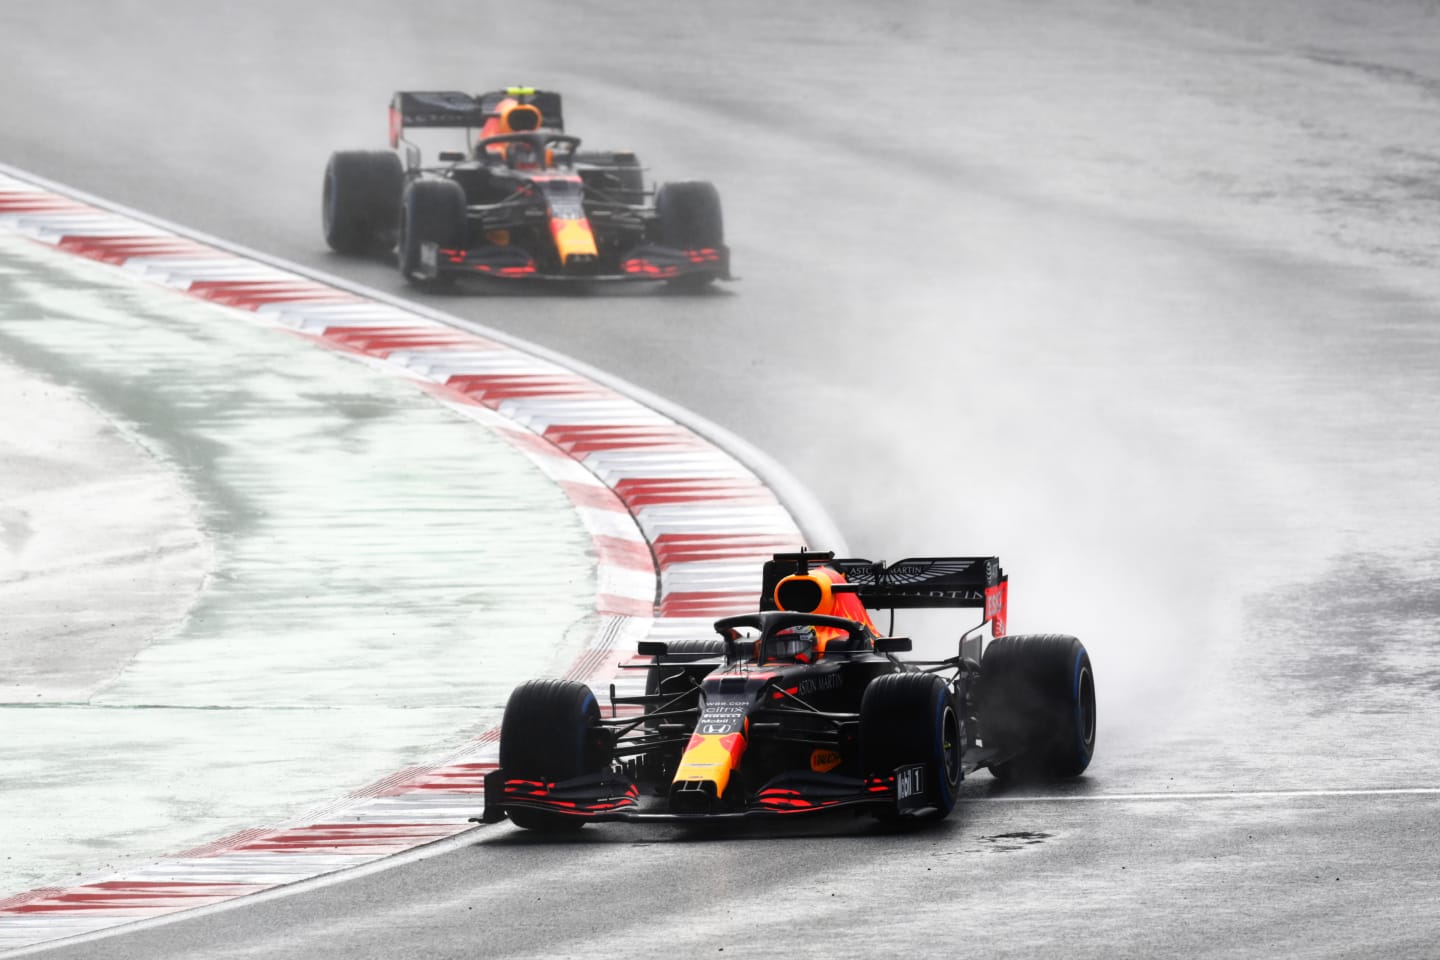 ISTANBUL, TURKEY - NOVEMBER 15: Max Verstappen of the Netherlands driving the (33) Aston Martin Red Bull Racing RB16 leads Alexander Albon of Thailand driving the (23) Aston Martin Red Bull Racing RB16 during the F1 Grand Prix of Turkey at Intercity Istanbul Park on November 15, 2020 in Istanbul, Turkey. (Photo by Clive Mason/Getty Images)